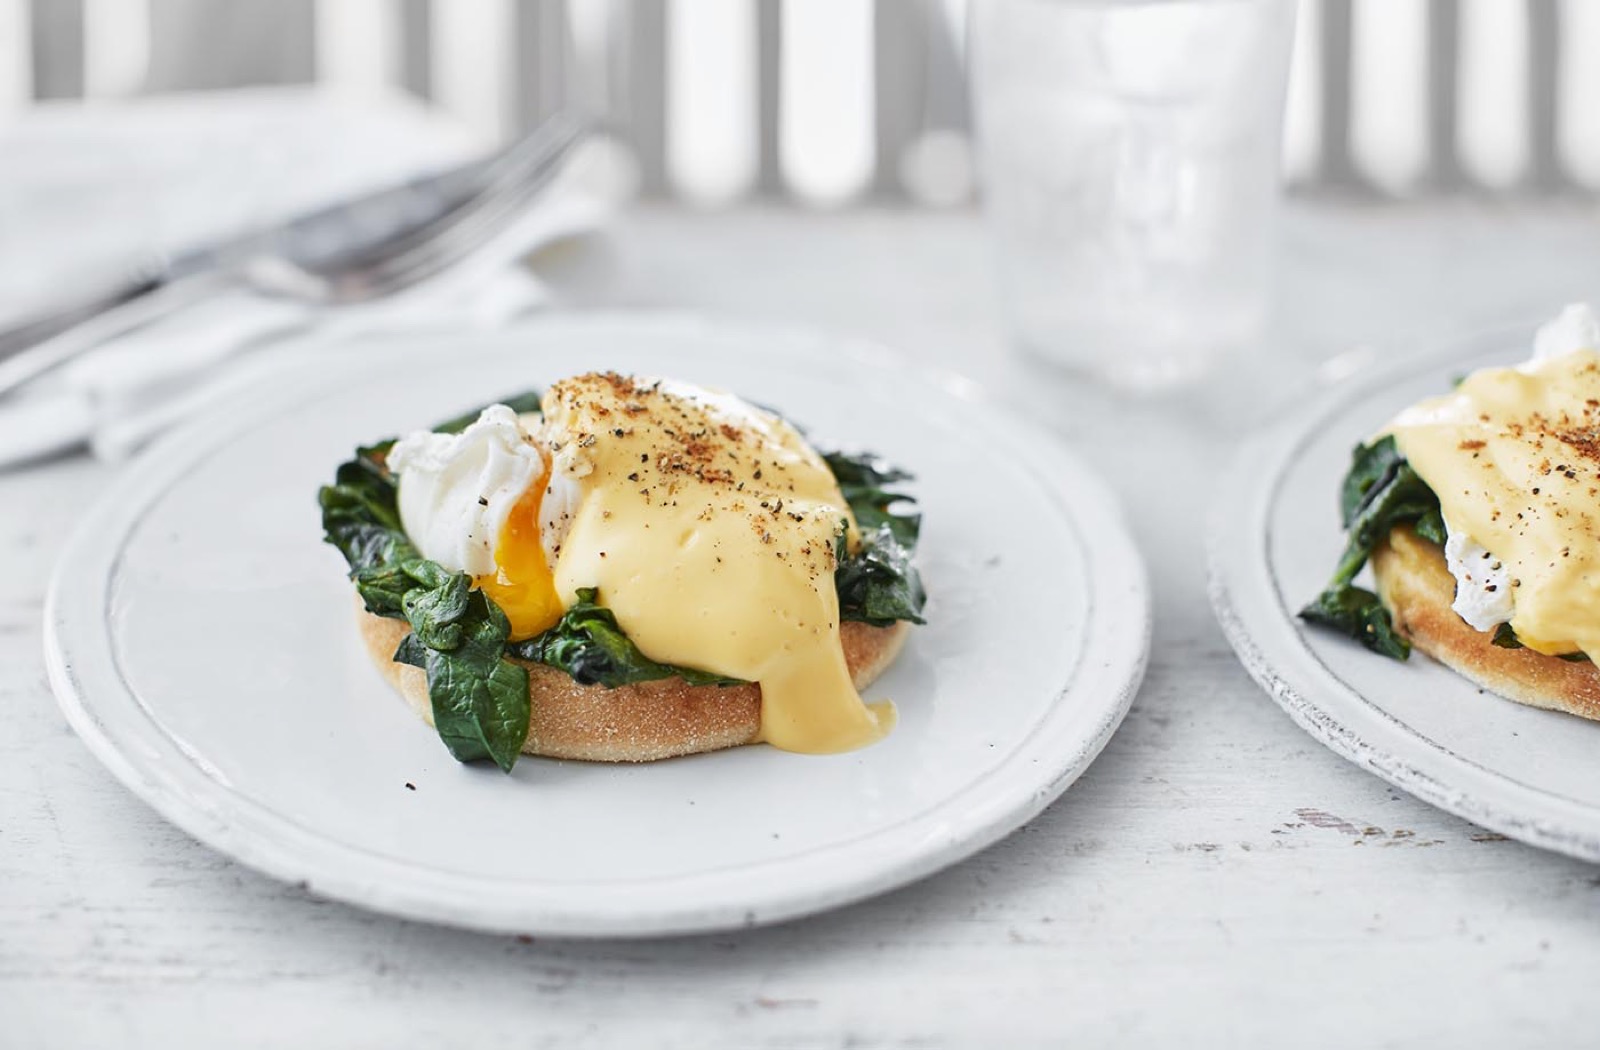 Take Trip Around Italy in This Quiz — If You Get 18, You Win Eggs Florentine